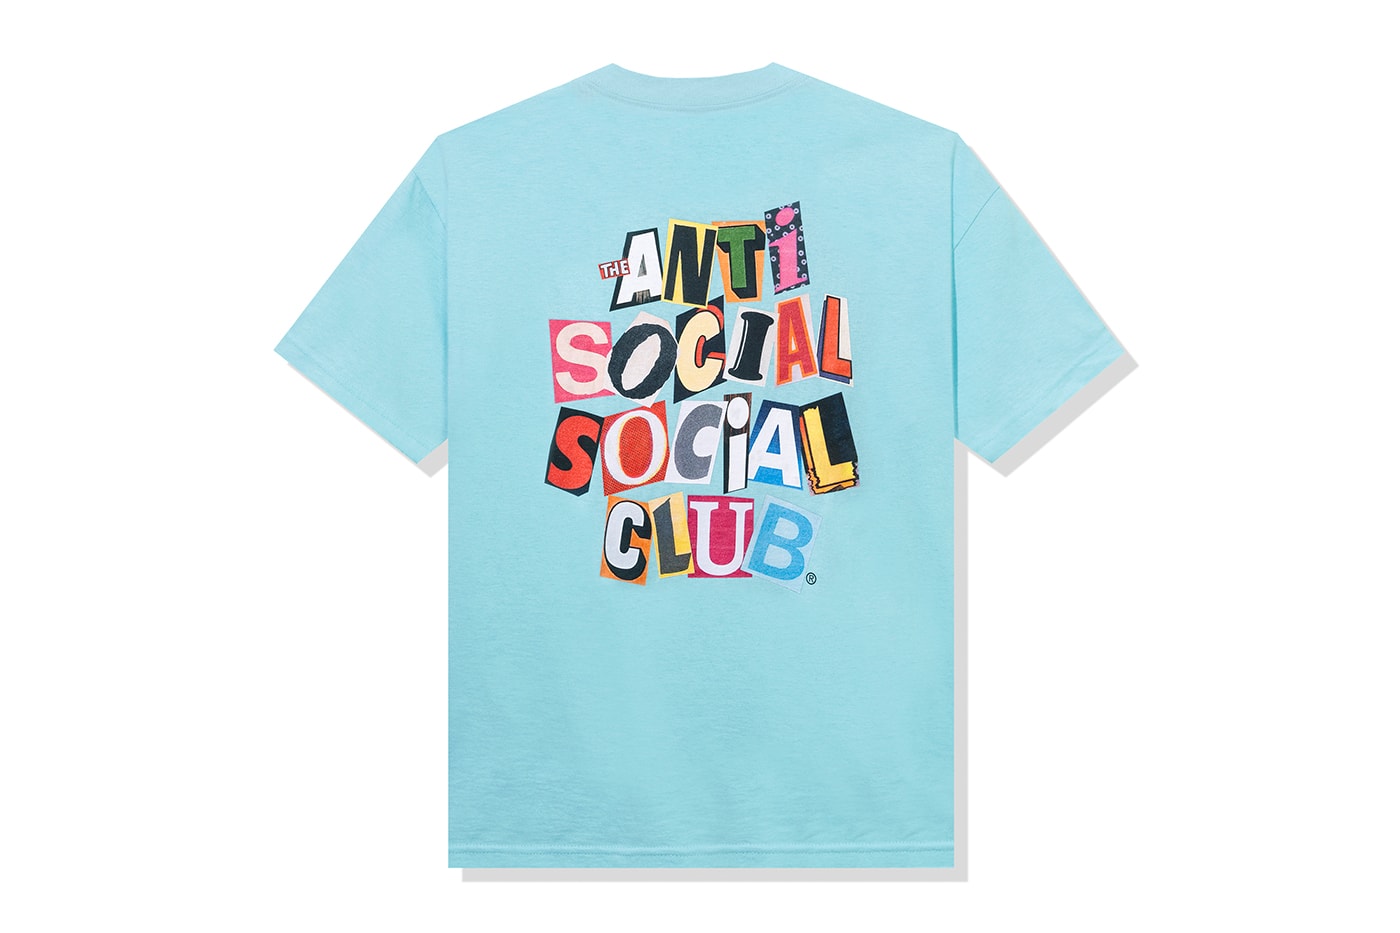 ANTI SOCIAL SOCIAL CLUB FW22 FALSE PROMISES Collection Full Look Release Info Date Buy Price UNDEFEATED Collaboration 